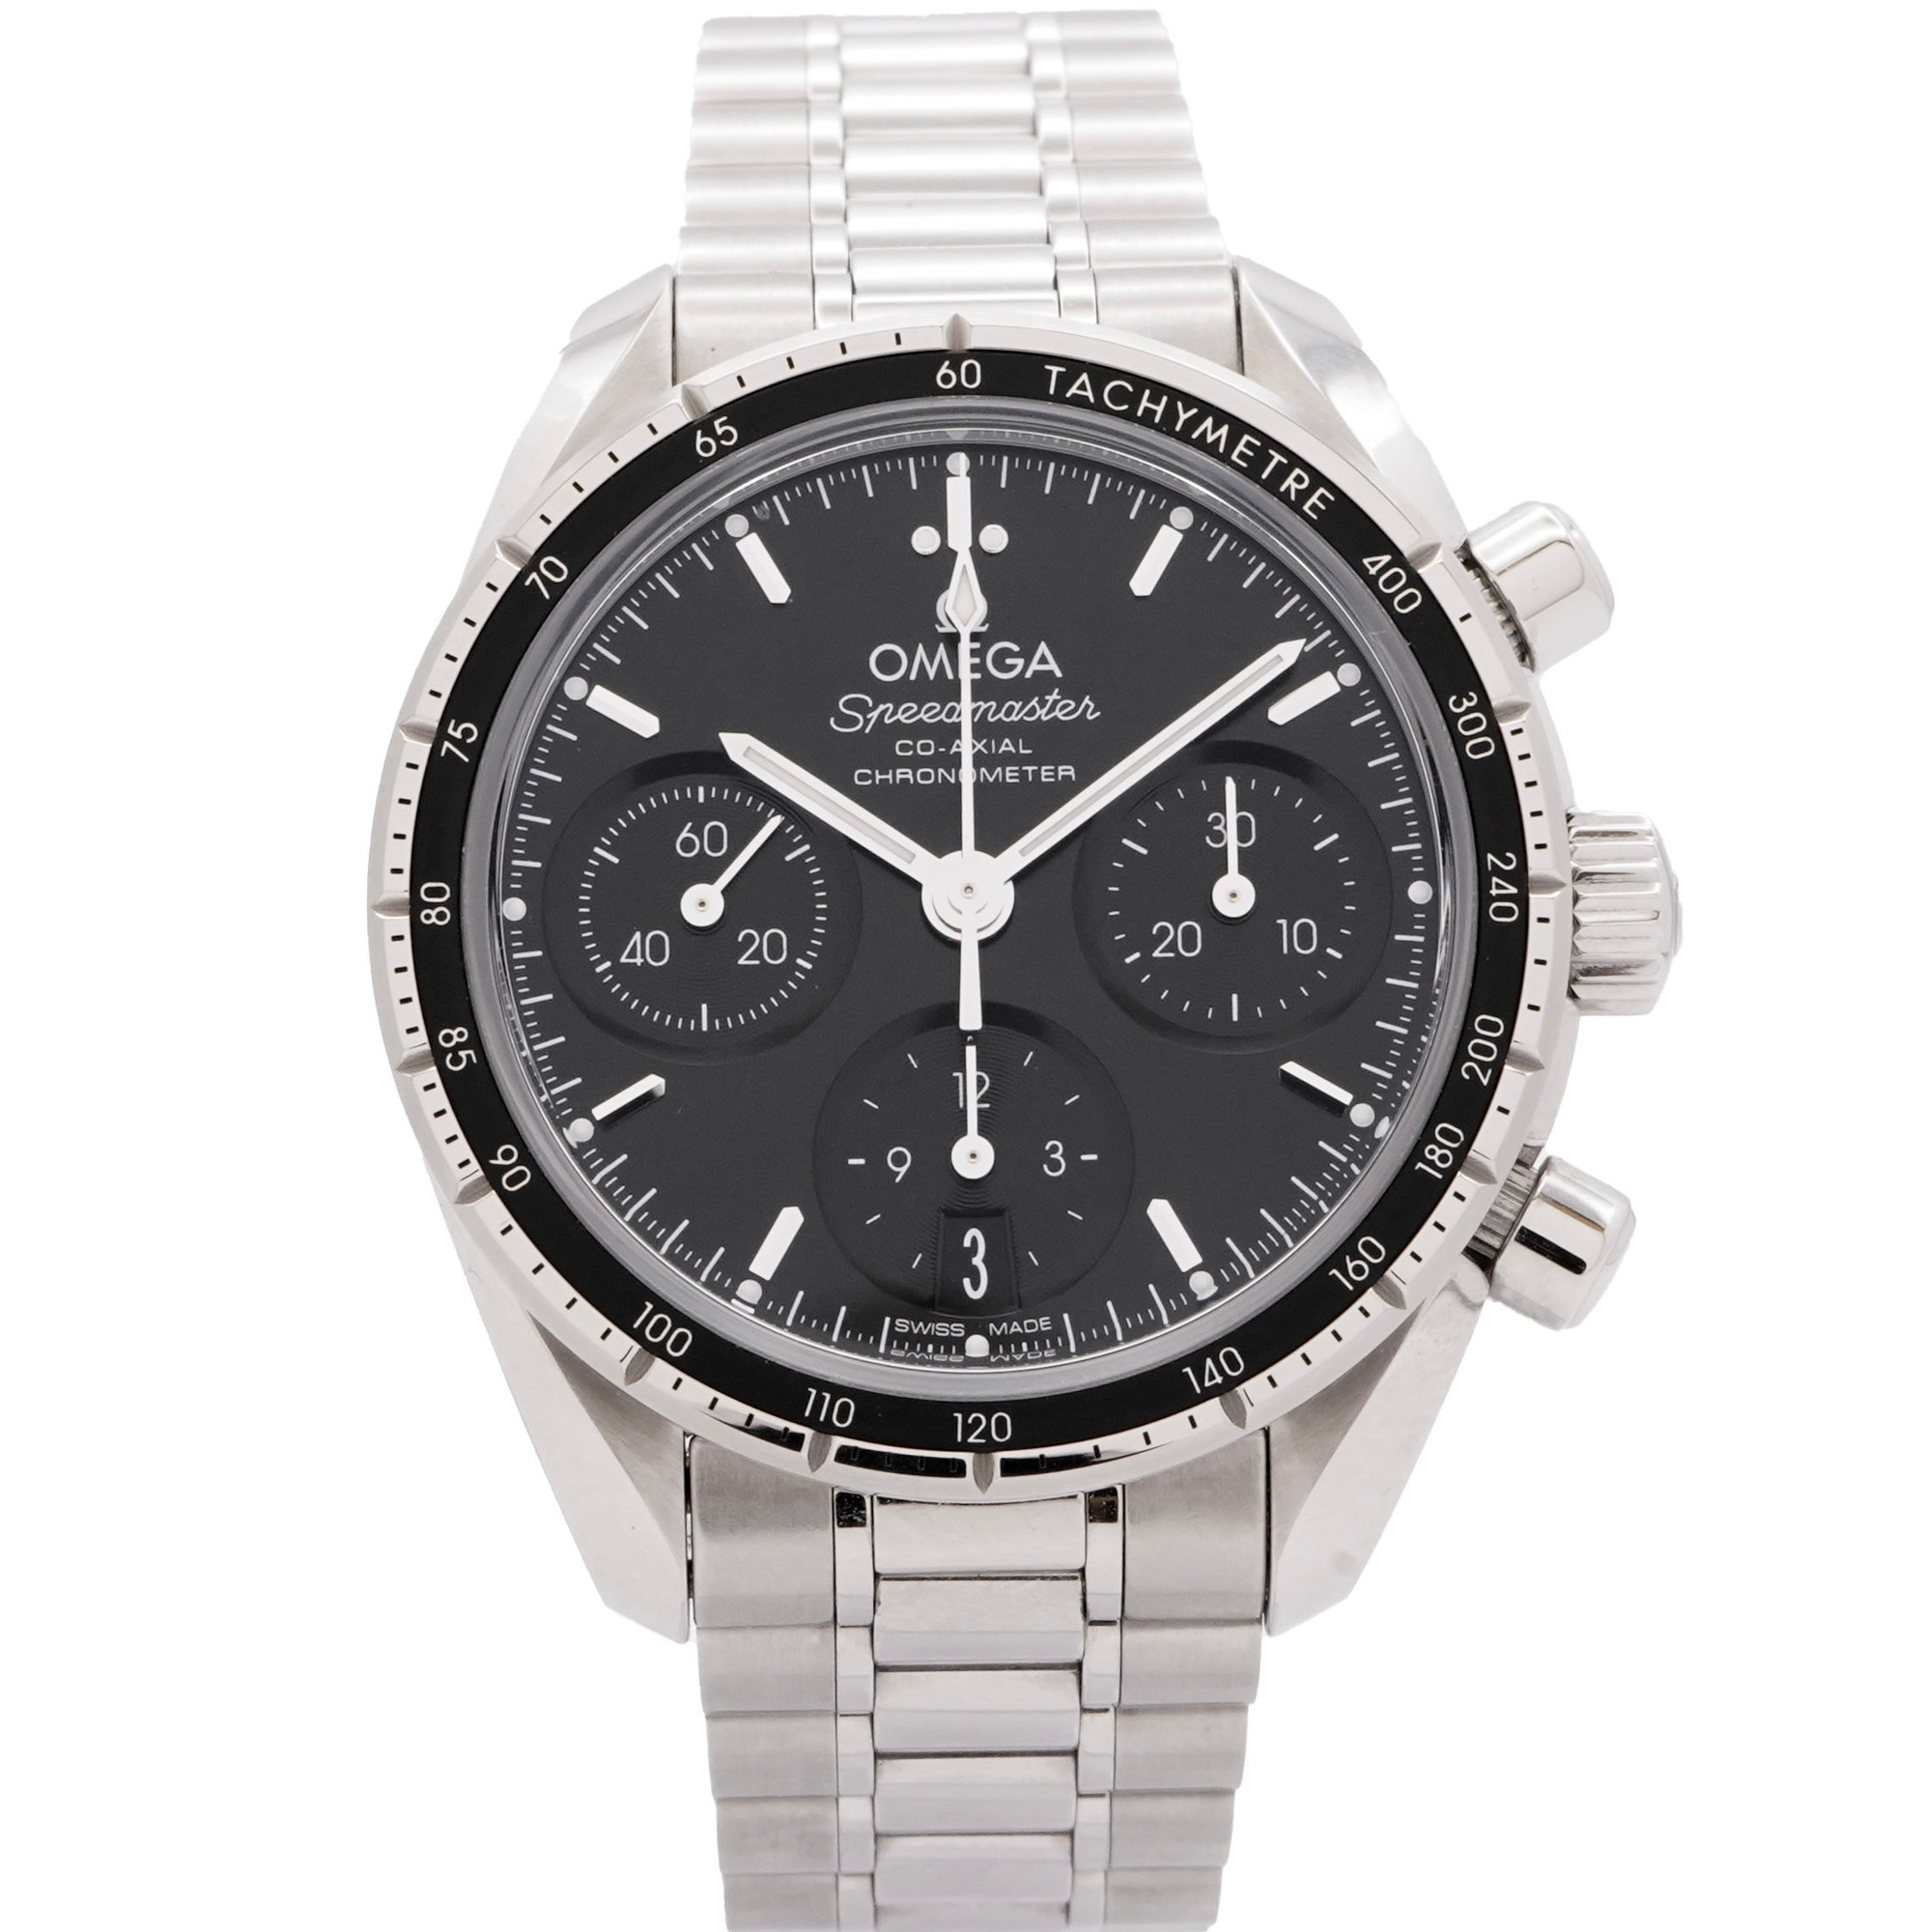 Omega Speedmaster 38 Co-Axial Chronometer Chronograph *2022* - Inventory 3432